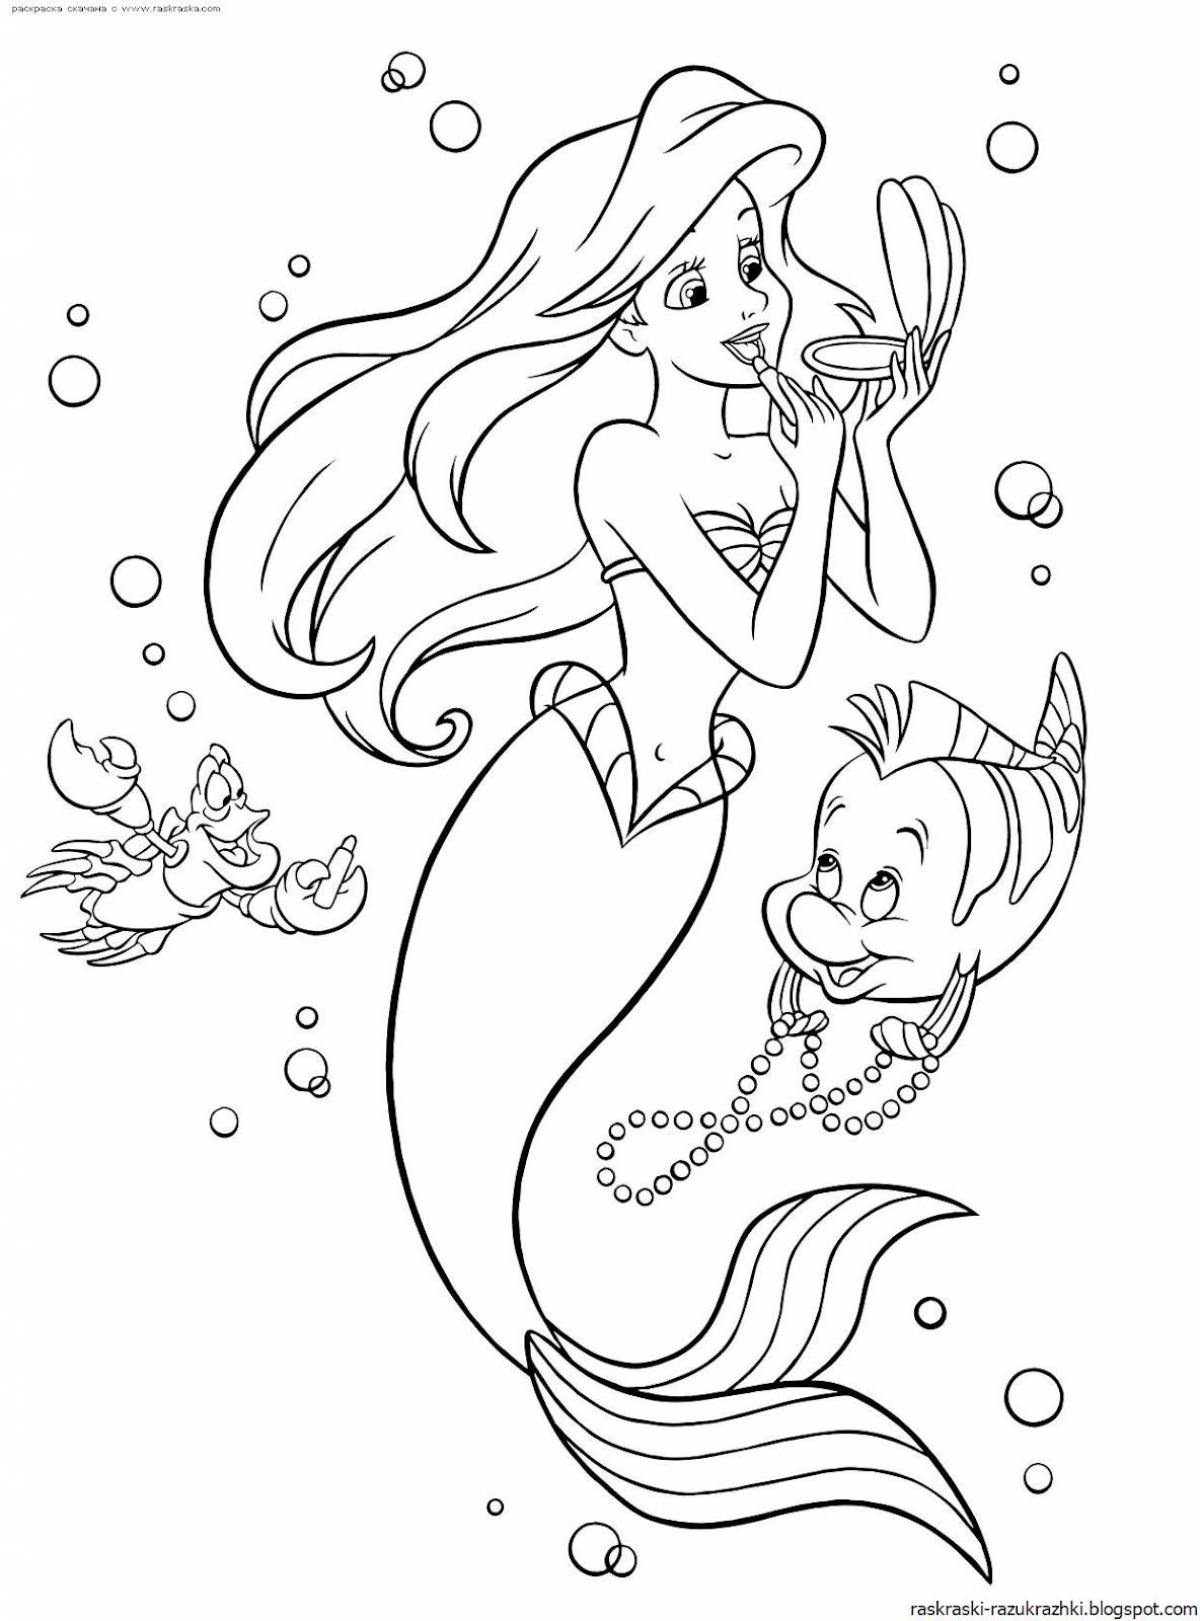 Adorable little mermaid coloring book for kids